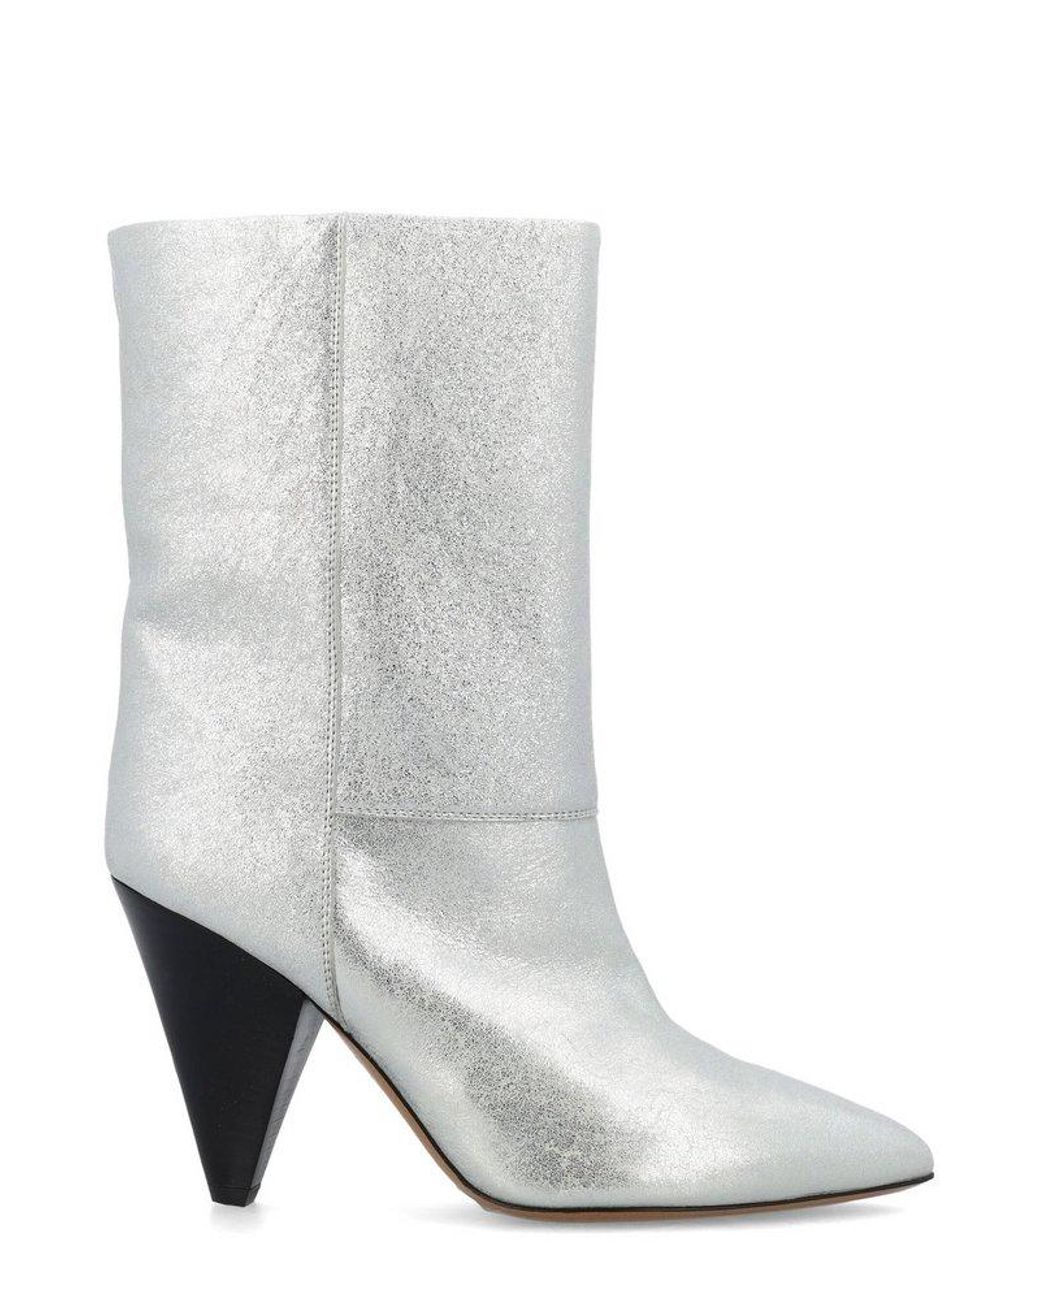 Isabel Marant Leather Locky Pointed-toe Boots in Silver (Metallic ...